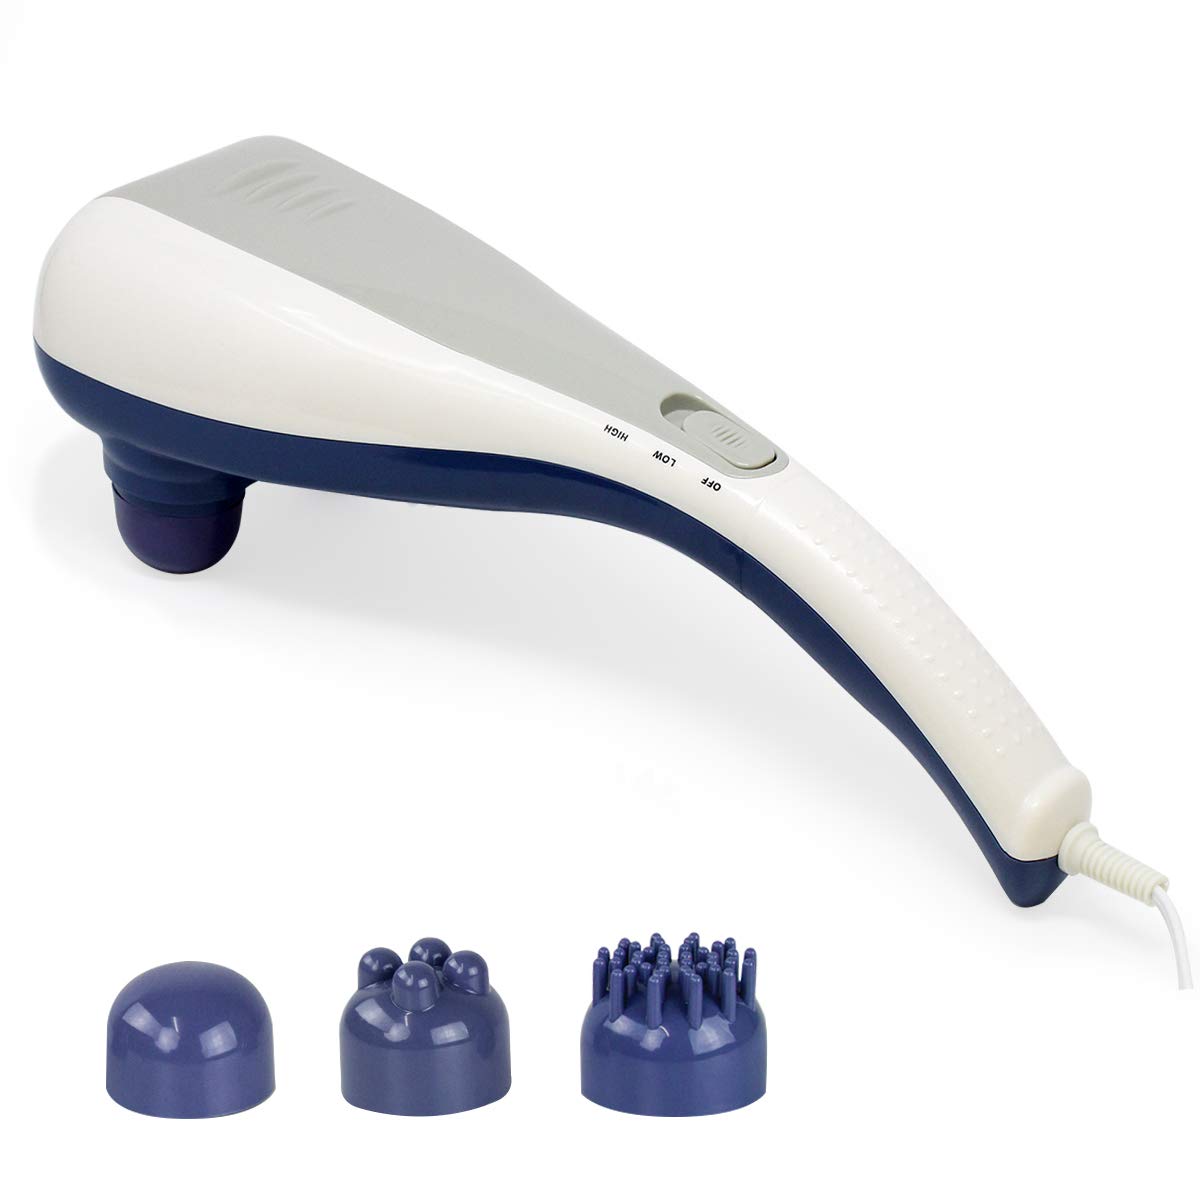 Dual Tapper Handheld Percussion Massager